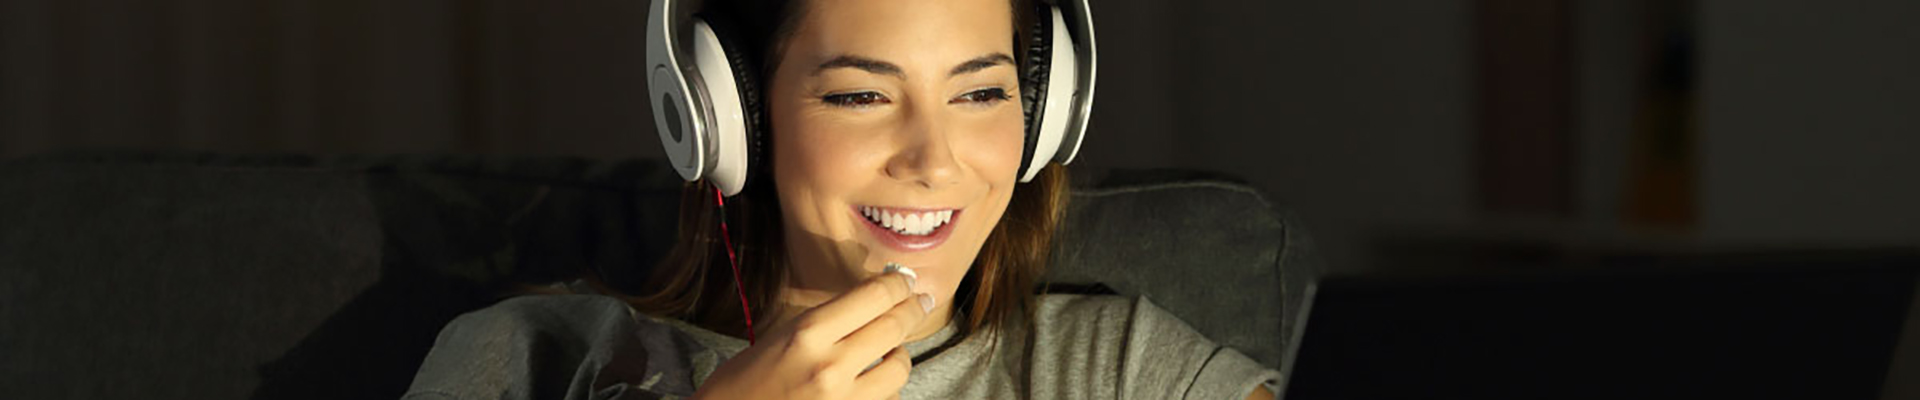 Photo of person wearing headphones and eating